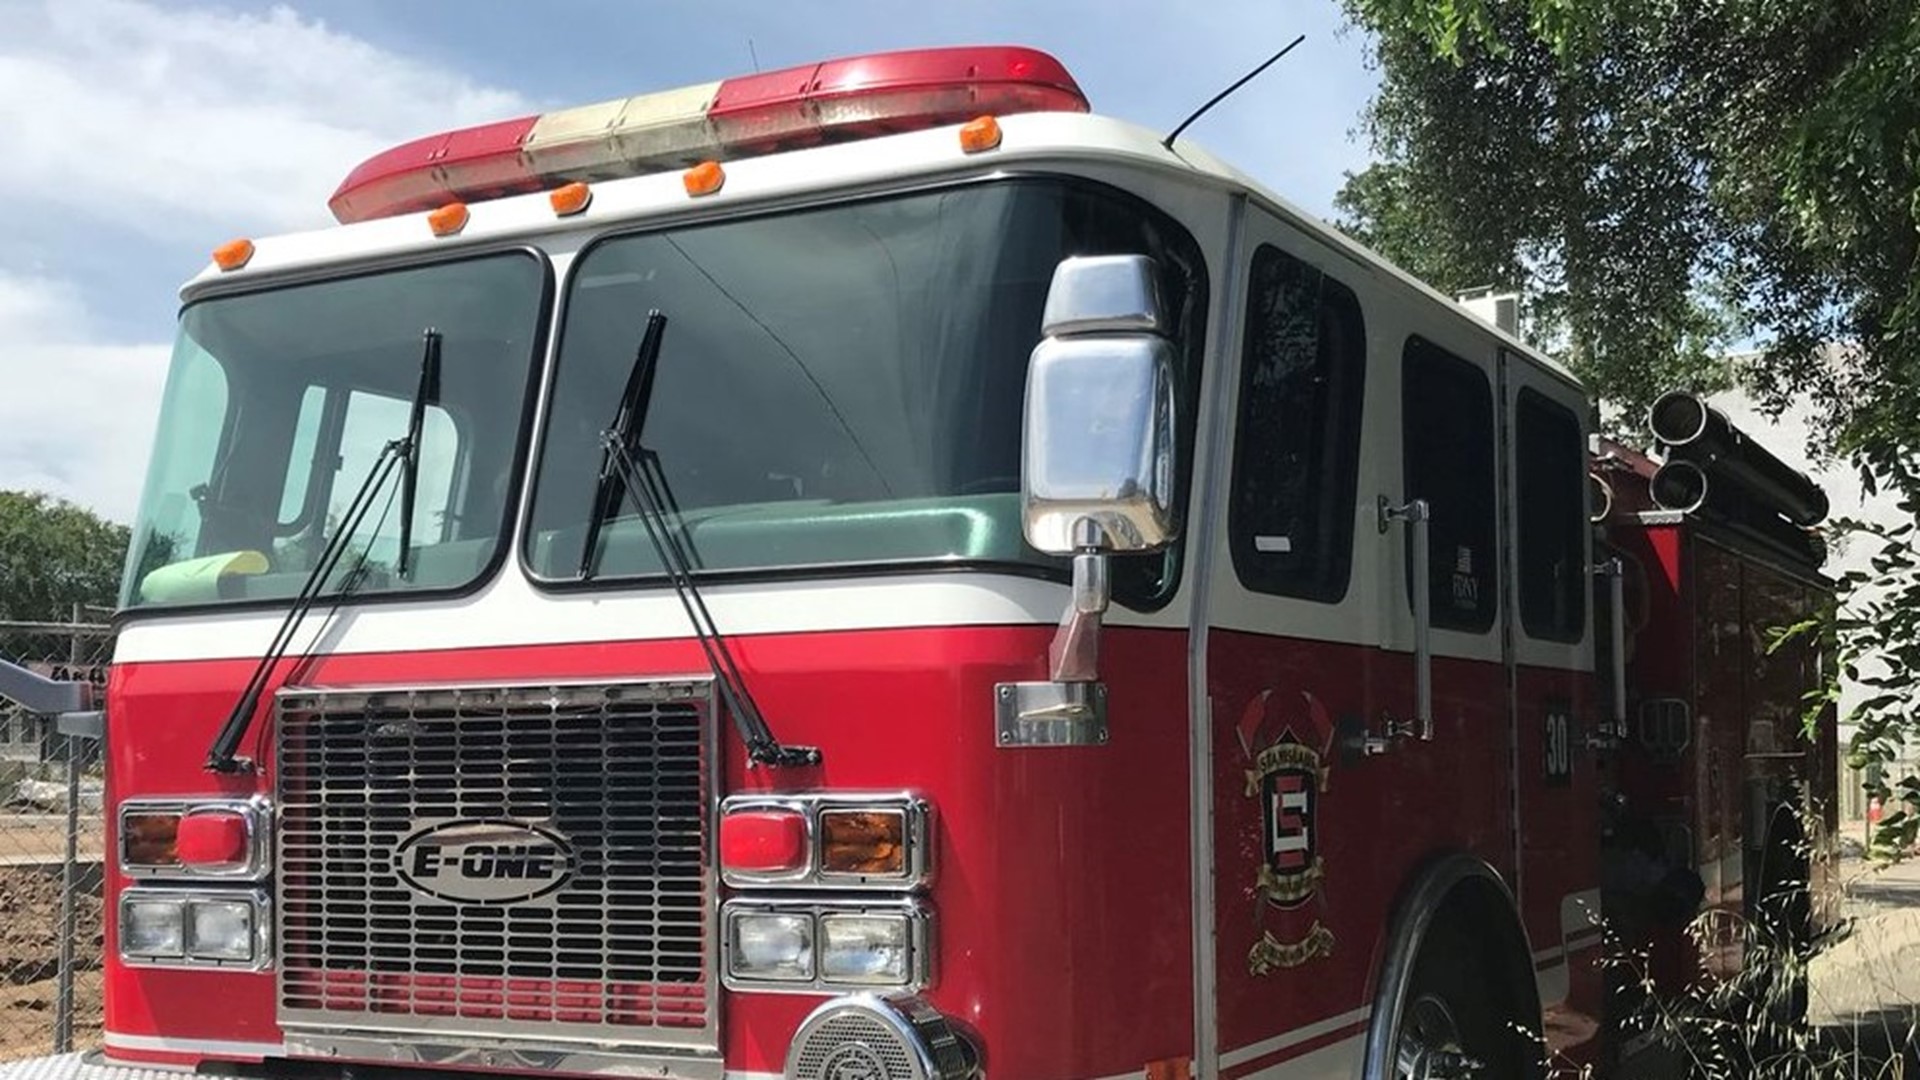 The City of Oakdale has less than two months to find a new fire protection service after deciding to cut ties with the Stanislaus Consolidated Fire Protection District.